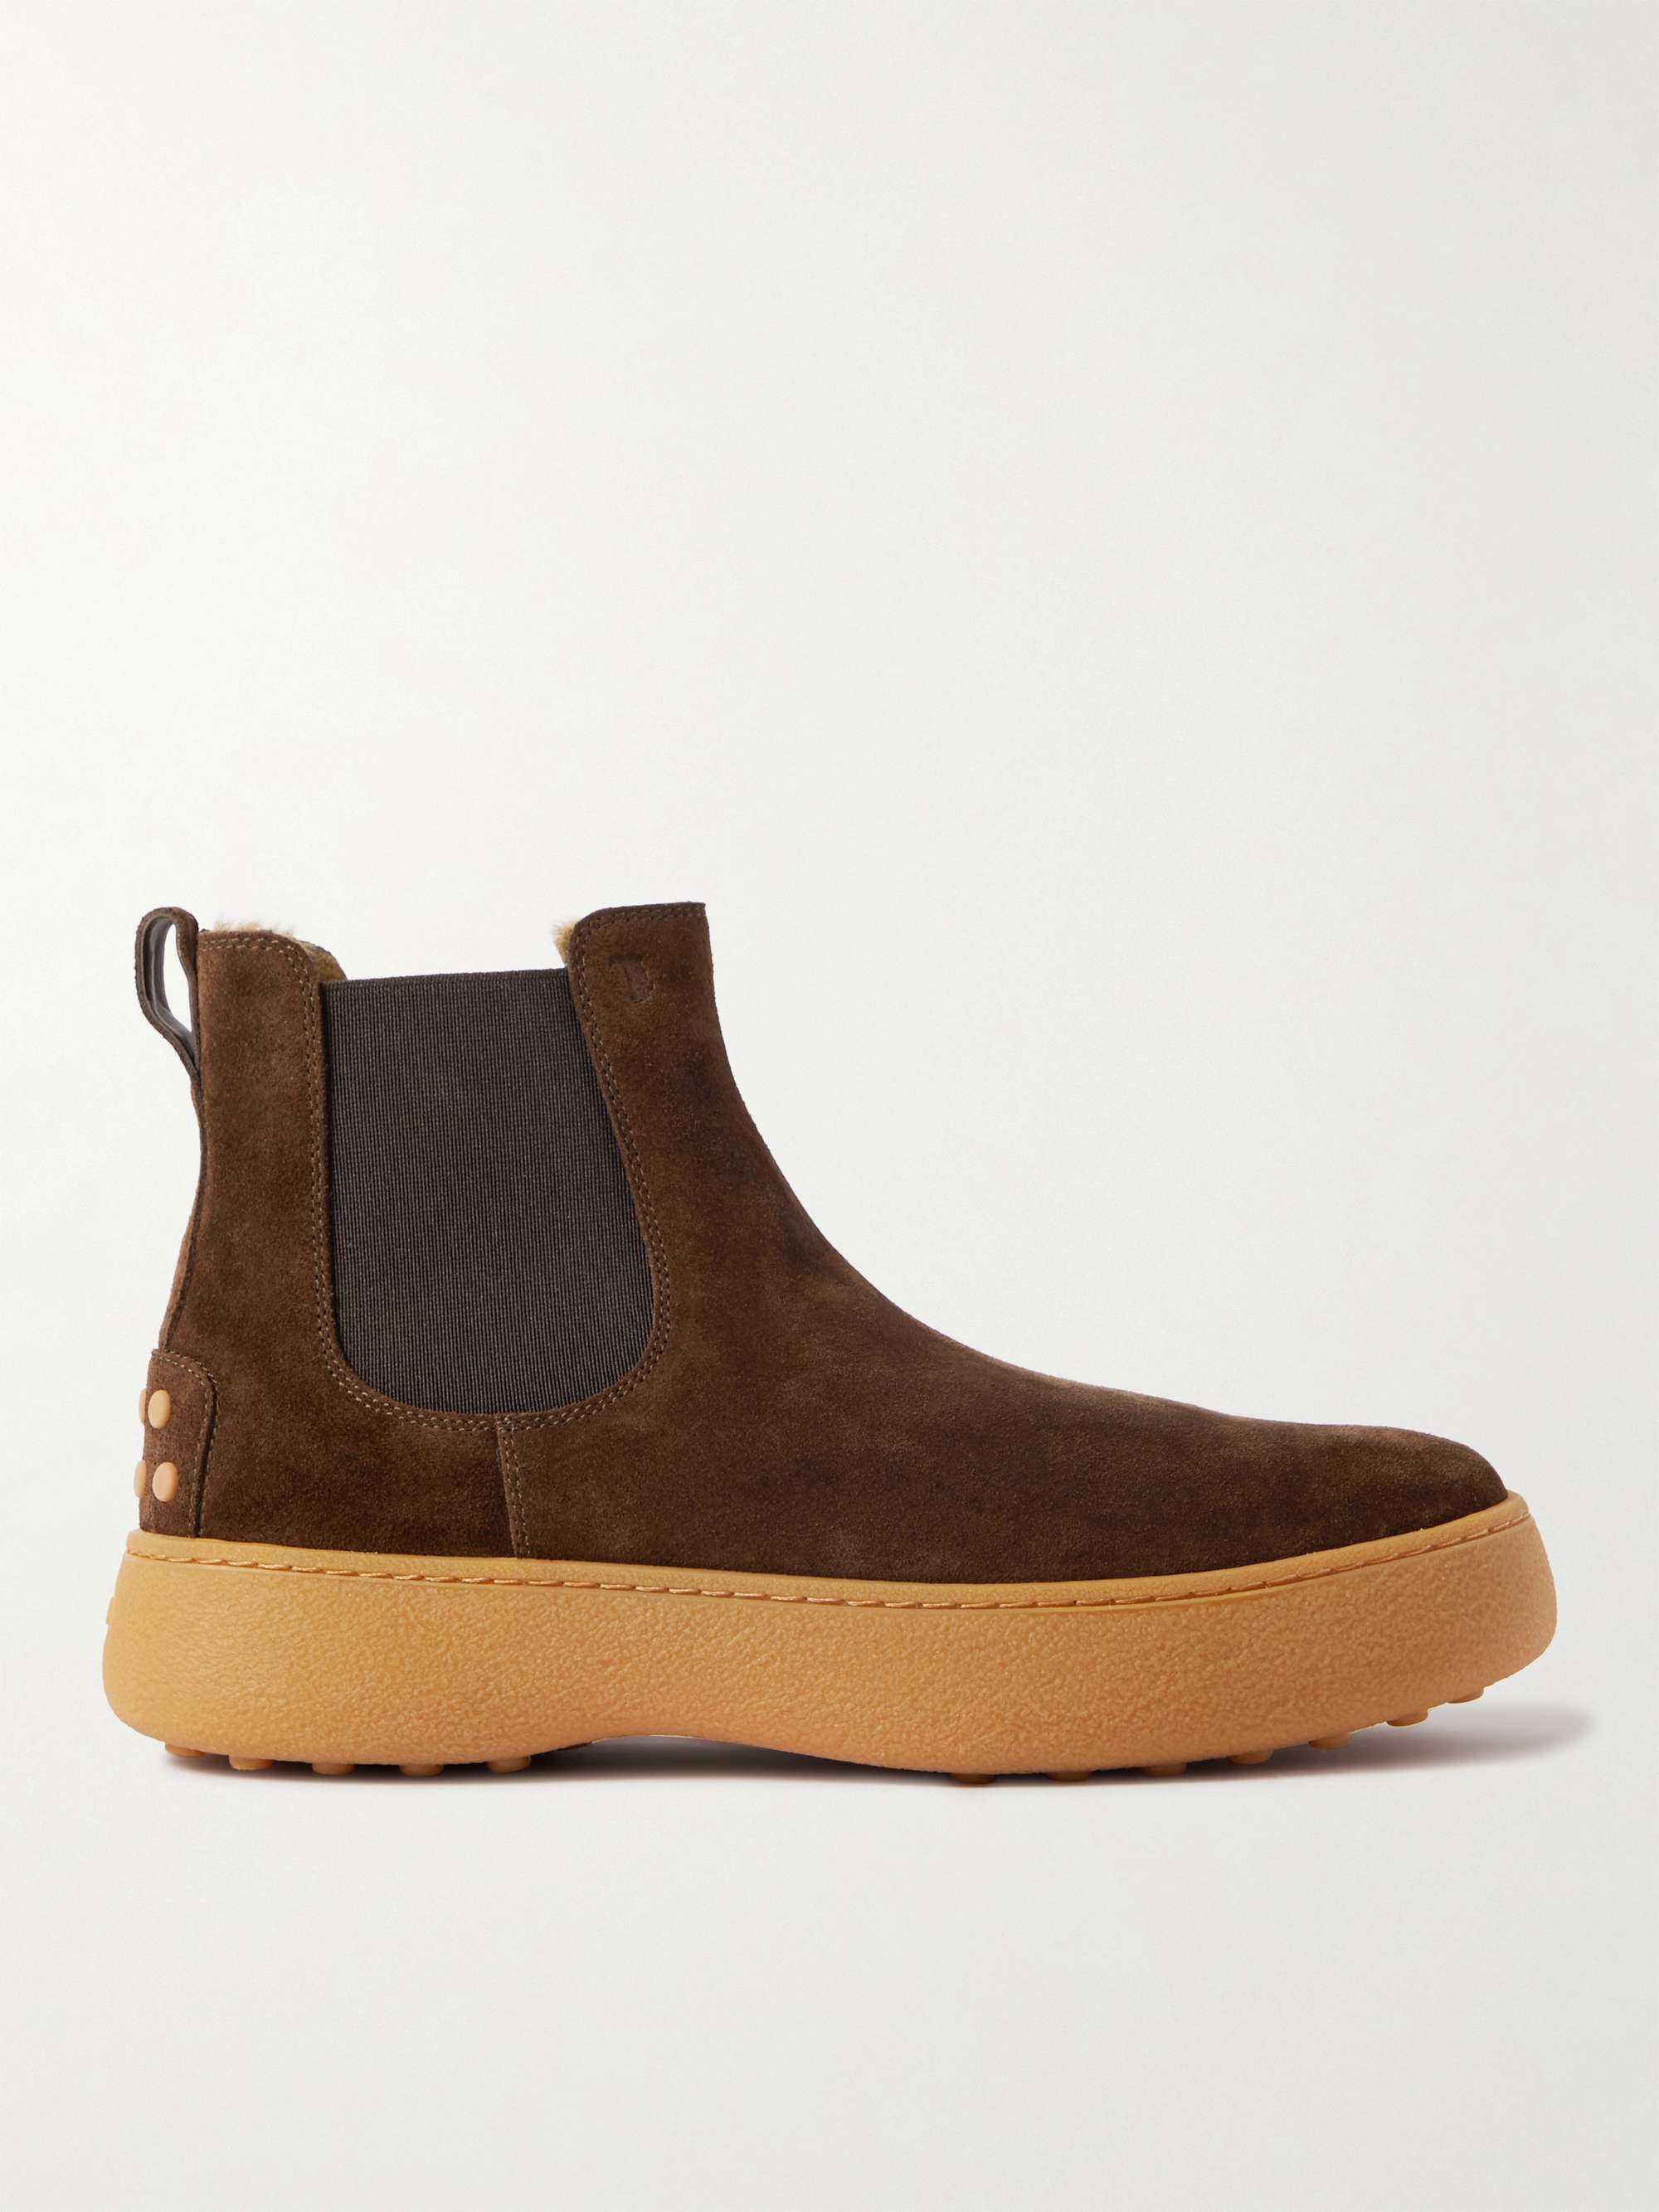 TOD'S Shearling-Lined Suede Chelsea Boots for Men | MR PORTER